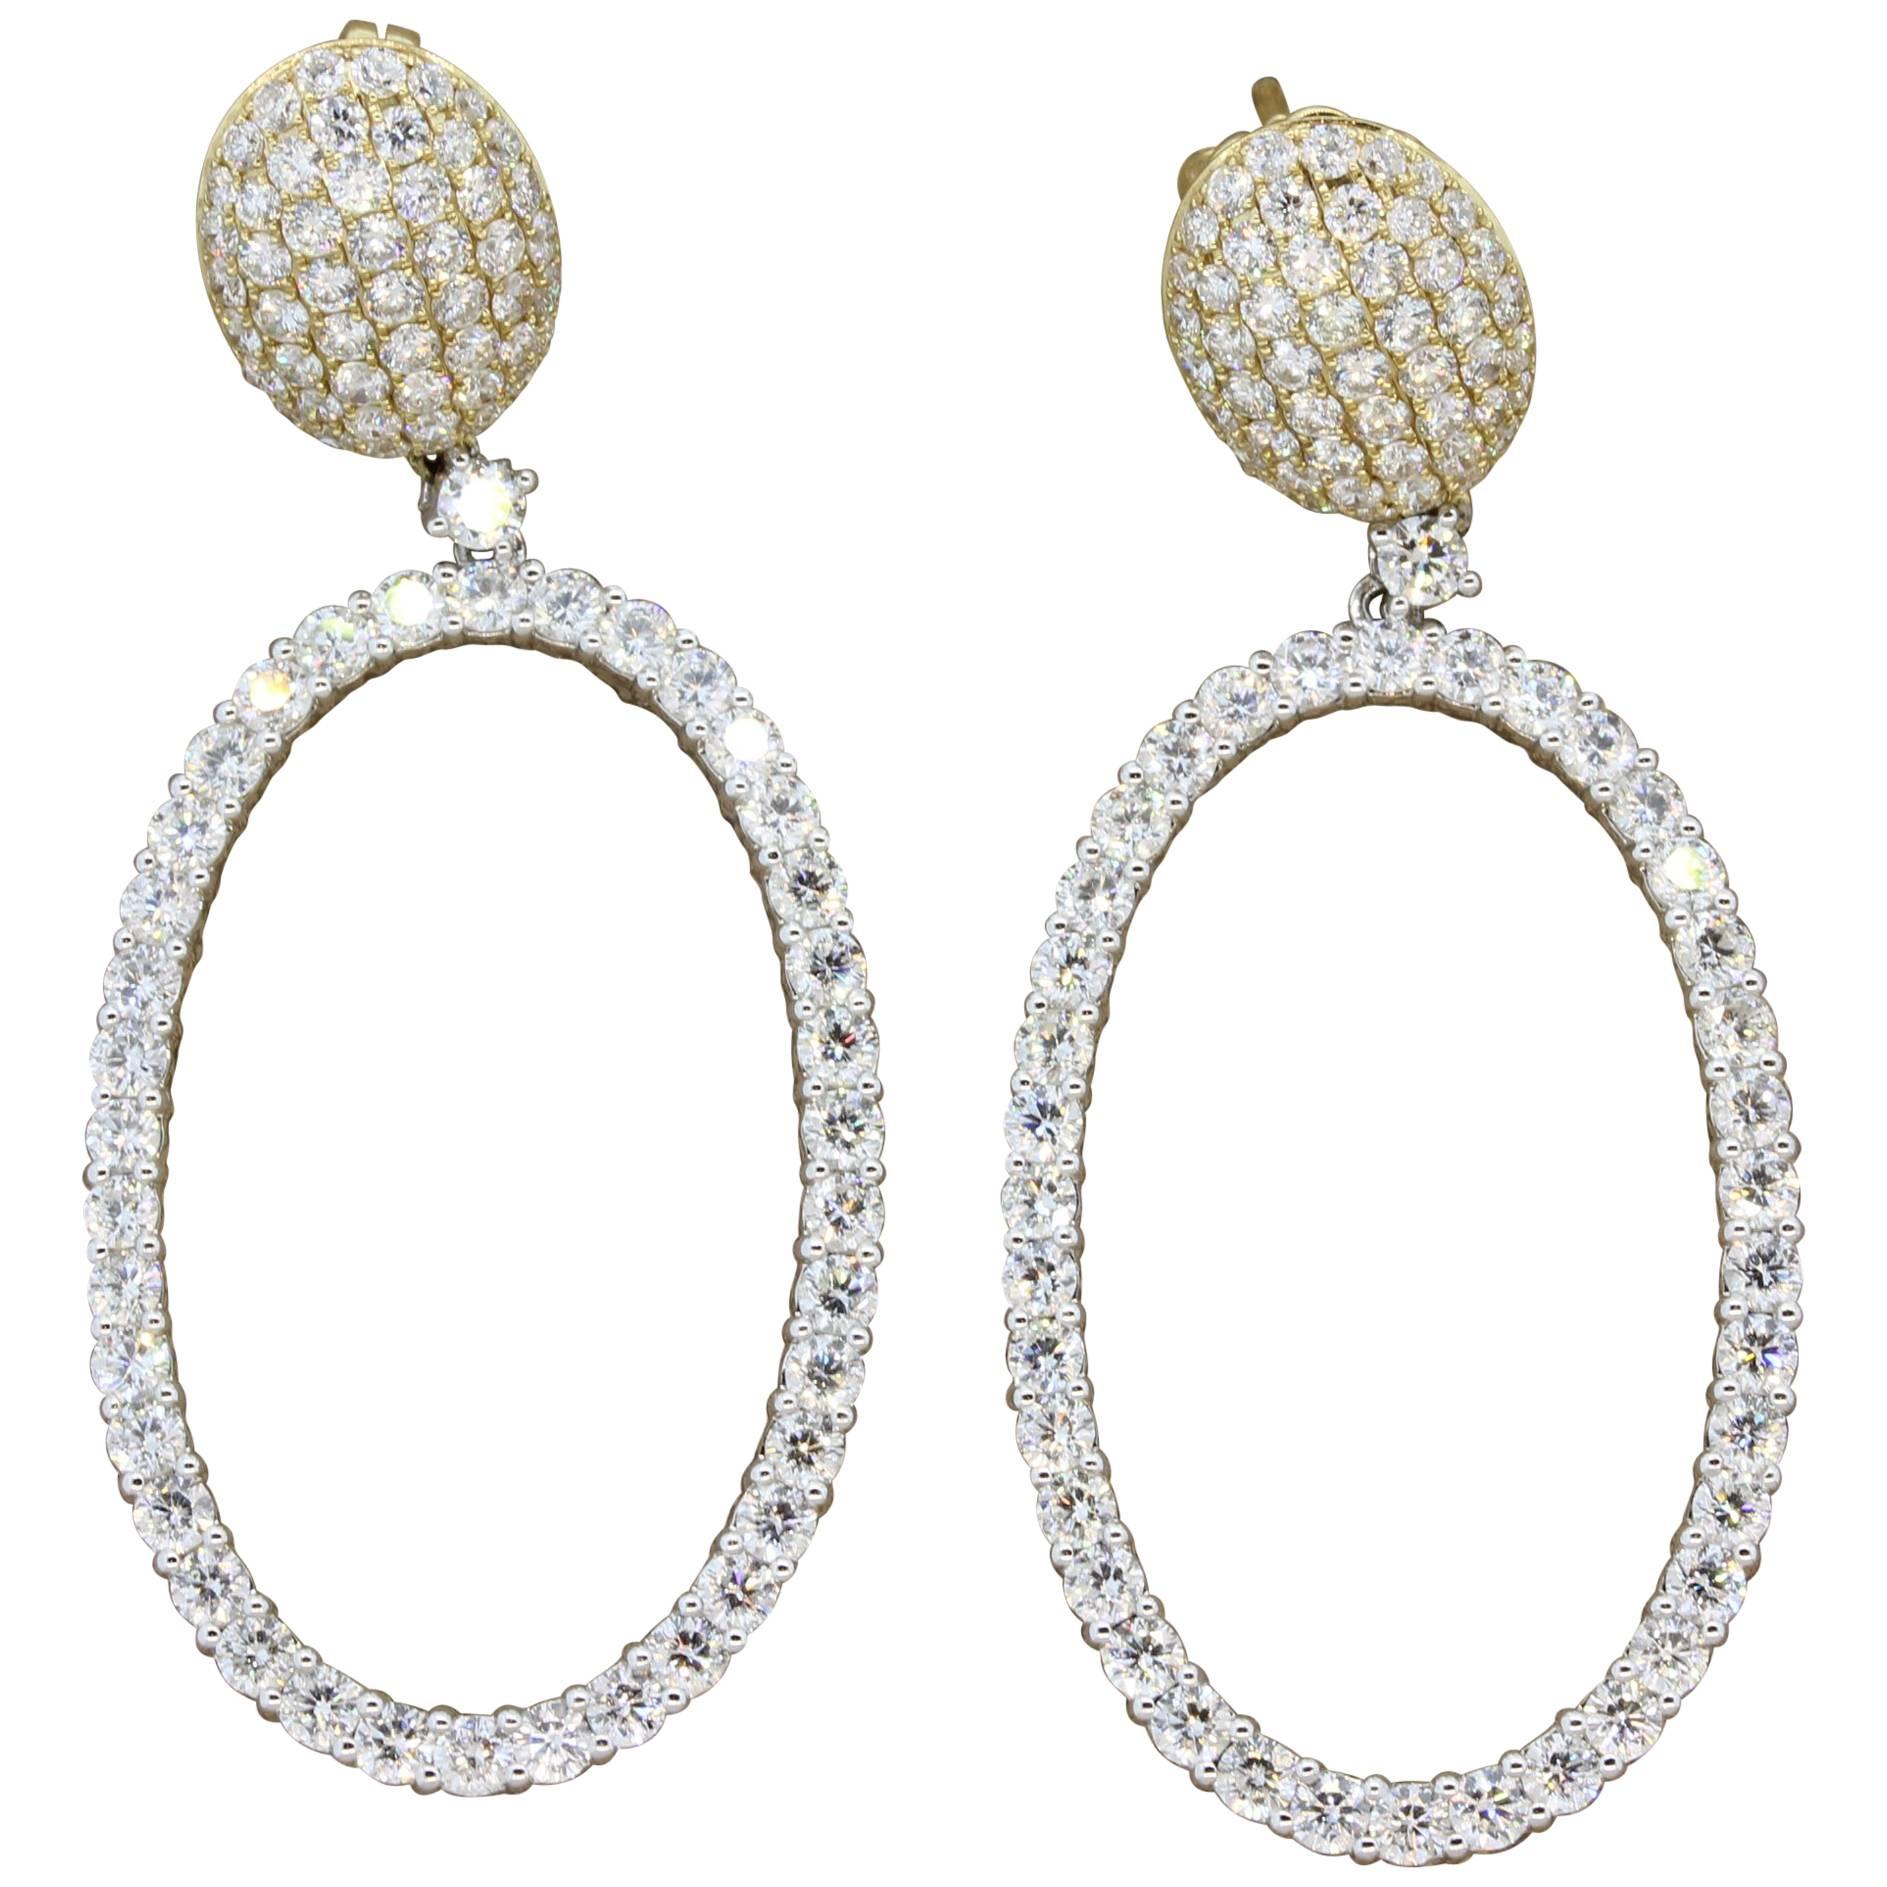 A modern take on the classic hoop earrings, this pair is a unique drop pair of hoops. It is studded with 6.22 carats of VS quality round cut diamonds. Set in white and yellow gold, these marvelous pair of earrings deserve a marvelous owner.